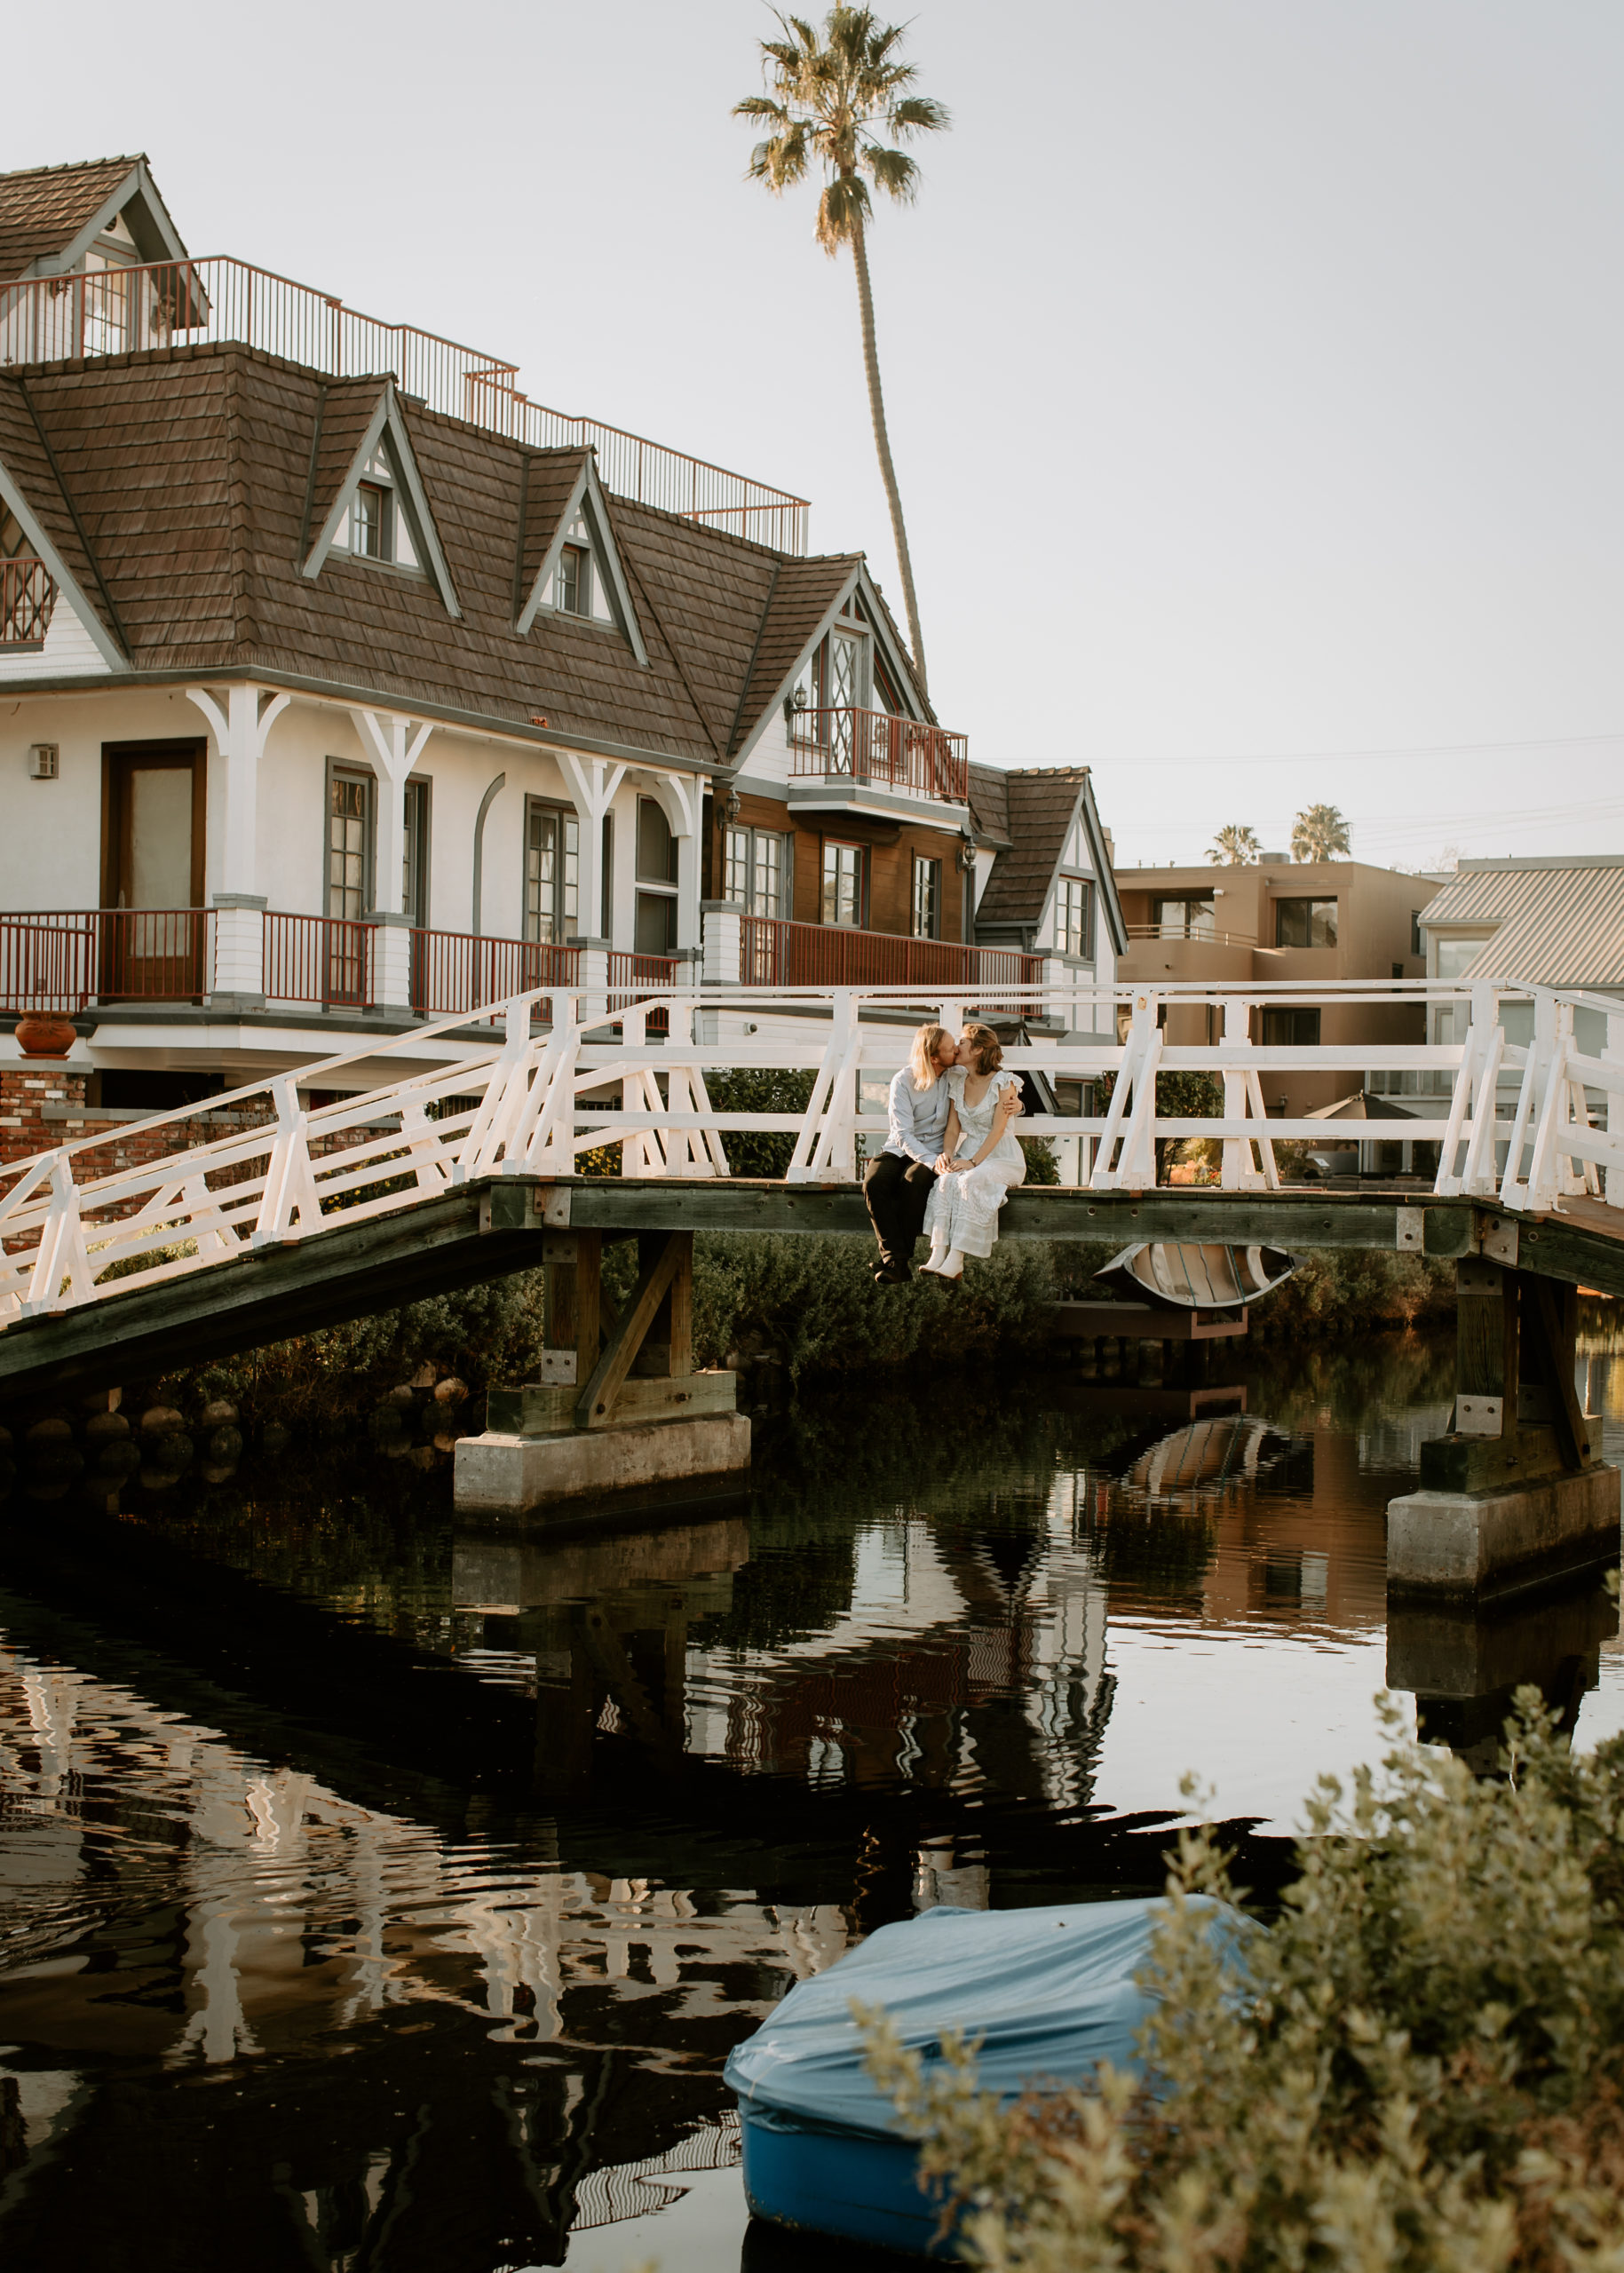 Venice Canals in Los Angeles engagement photos on bridge 